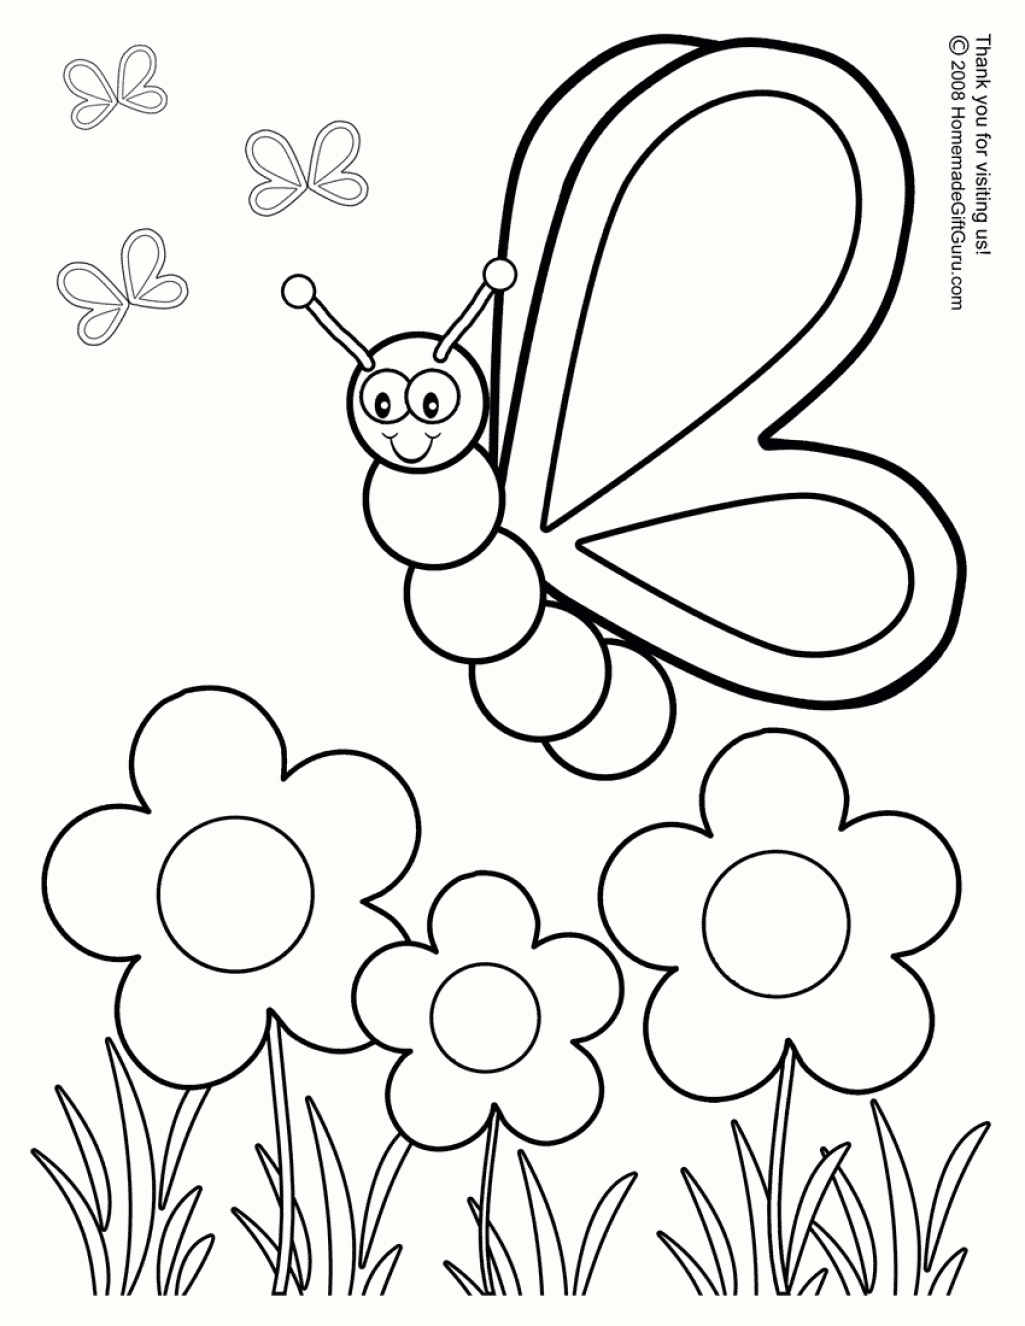 Spring Flowers Coloring Pages For Kids Printable Free Coloing ...